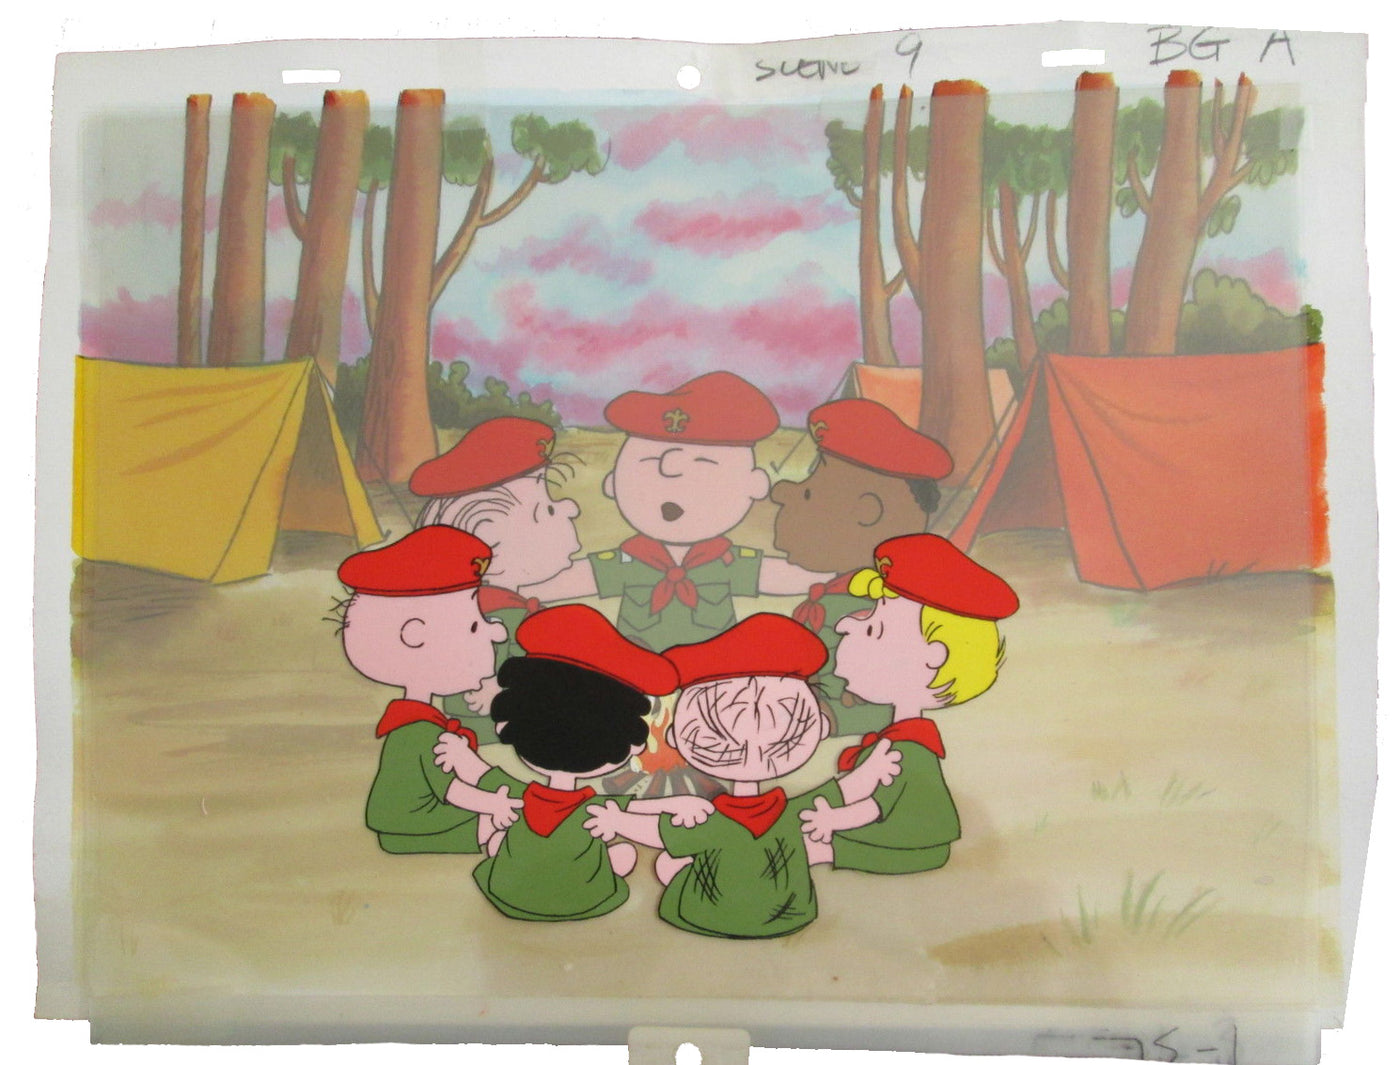 Original Peanuts Production Cel Setup on Production Background featuring Charlie Brown, Linus, Franklin, and Schroeder